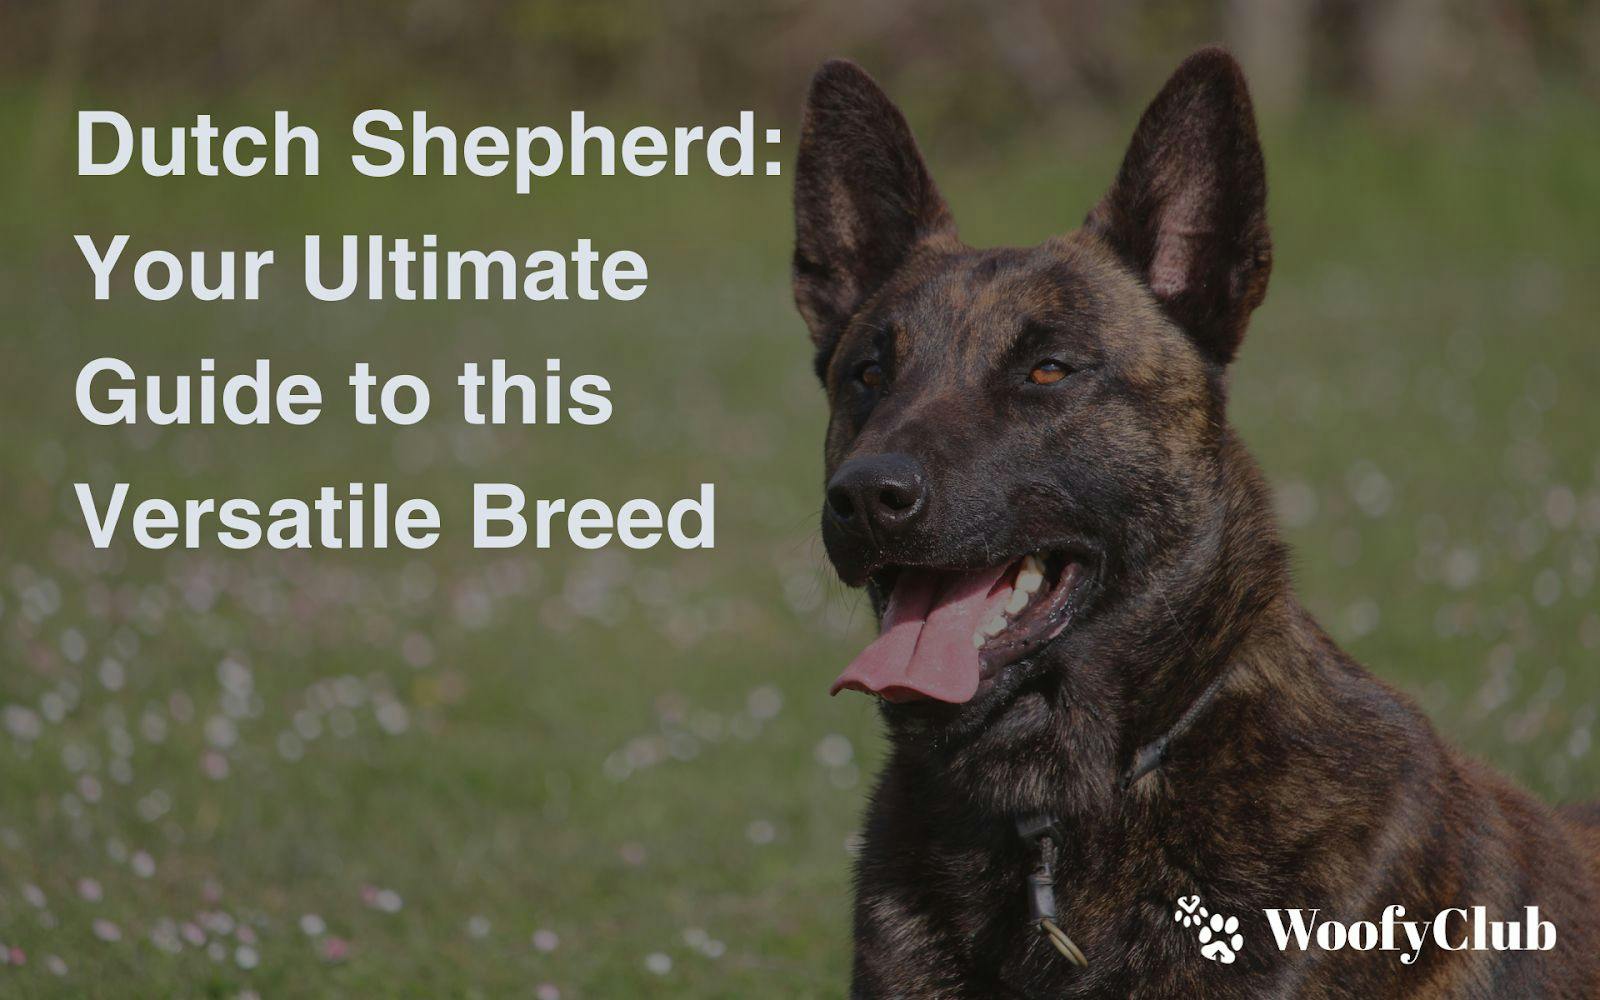 Dutch Shepherd: Your Ultimate Guide To This Versatile Breed